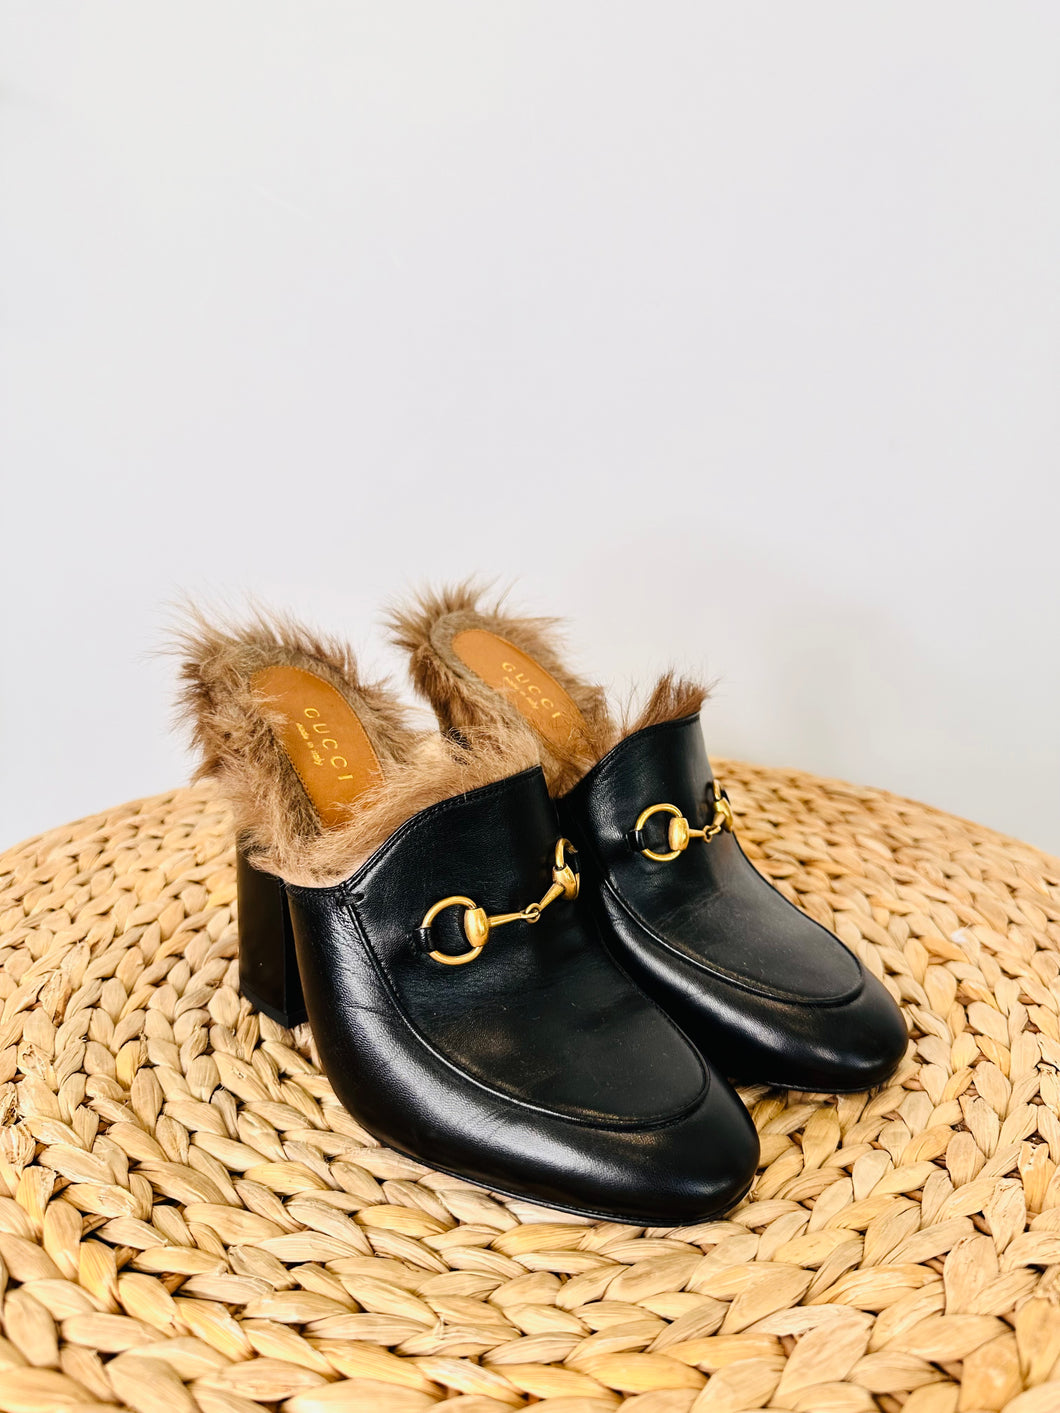 Princetown Heeled Mules - Size 37